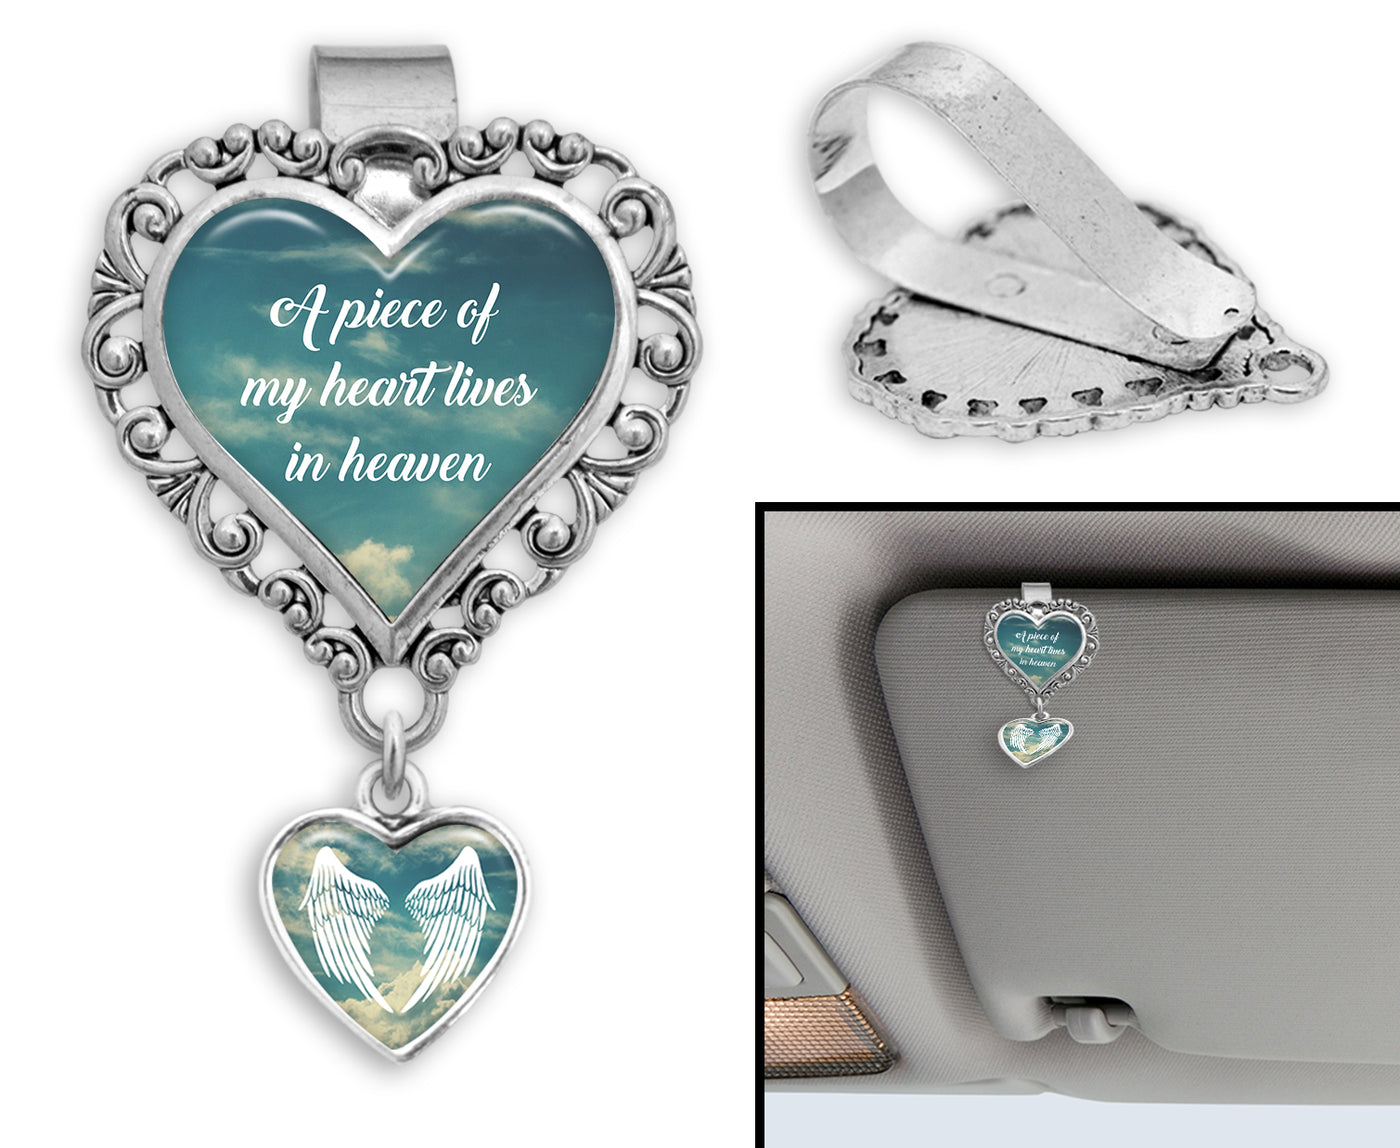 A Piece Of My Heart Lives In Heaven Heart Auto Visor Clip